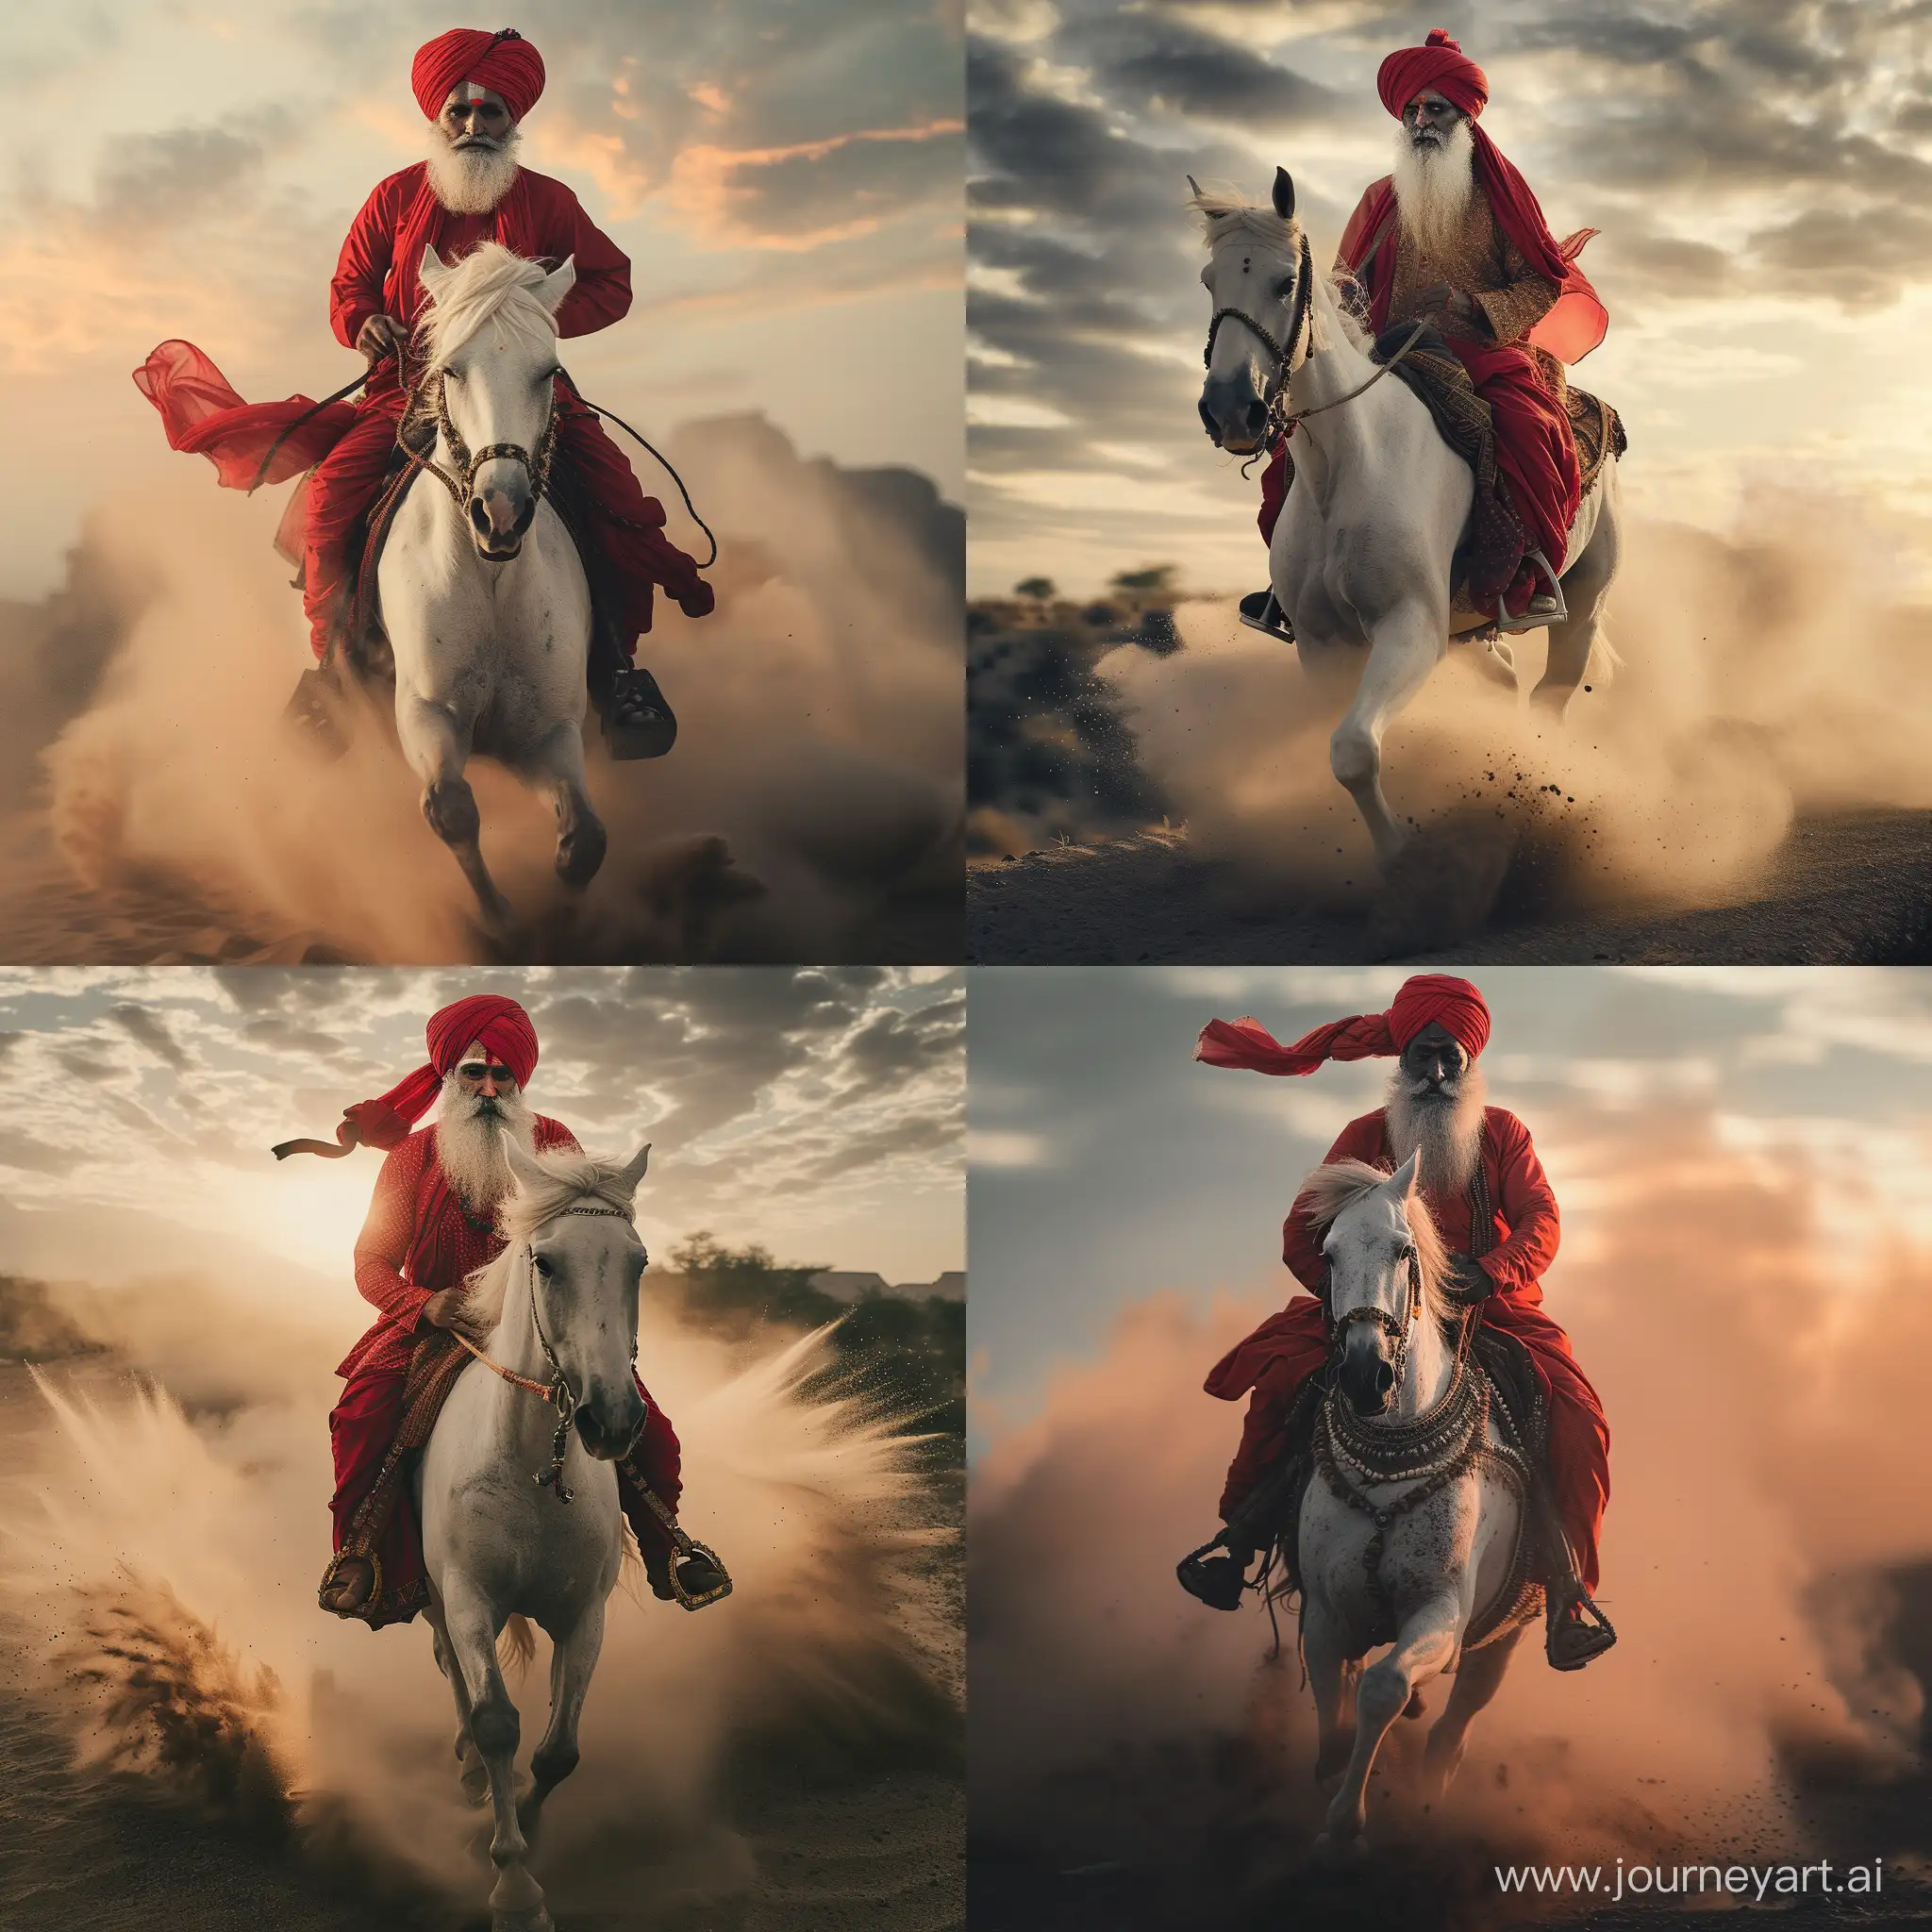 rabari rajasthan  red turban white beard riding on white horse in the desert with some dust and movement total body wide angle 24 mm fuji xt4 soft sunset light and contrast